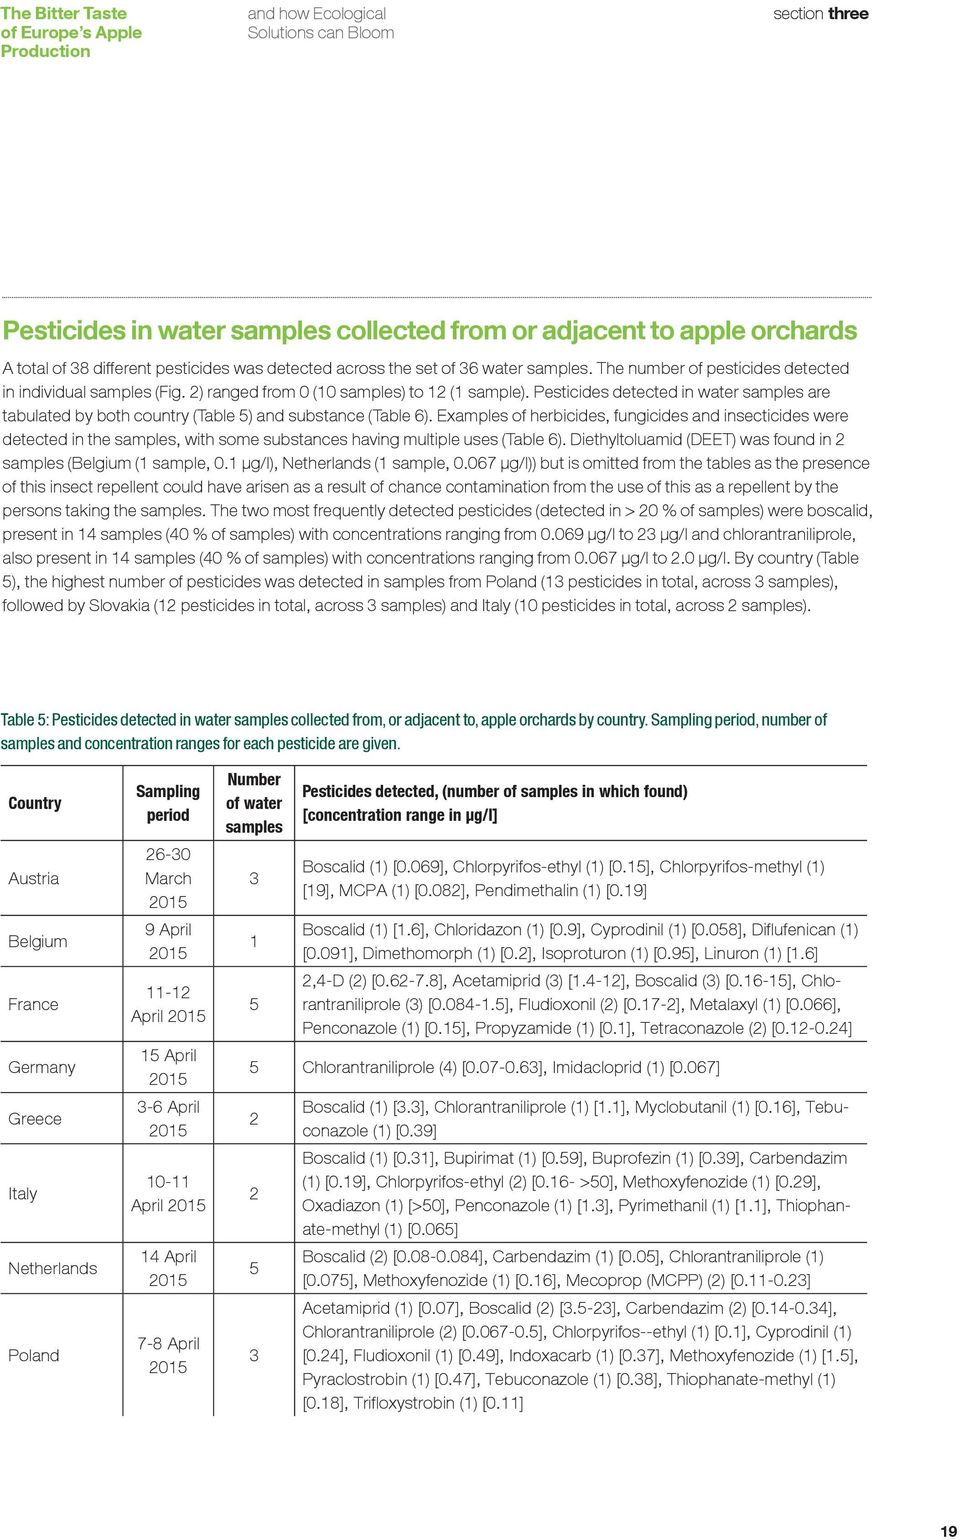 Pesticides detected in water samples are tabulated by both country (Table 5) and substance (Table 6).